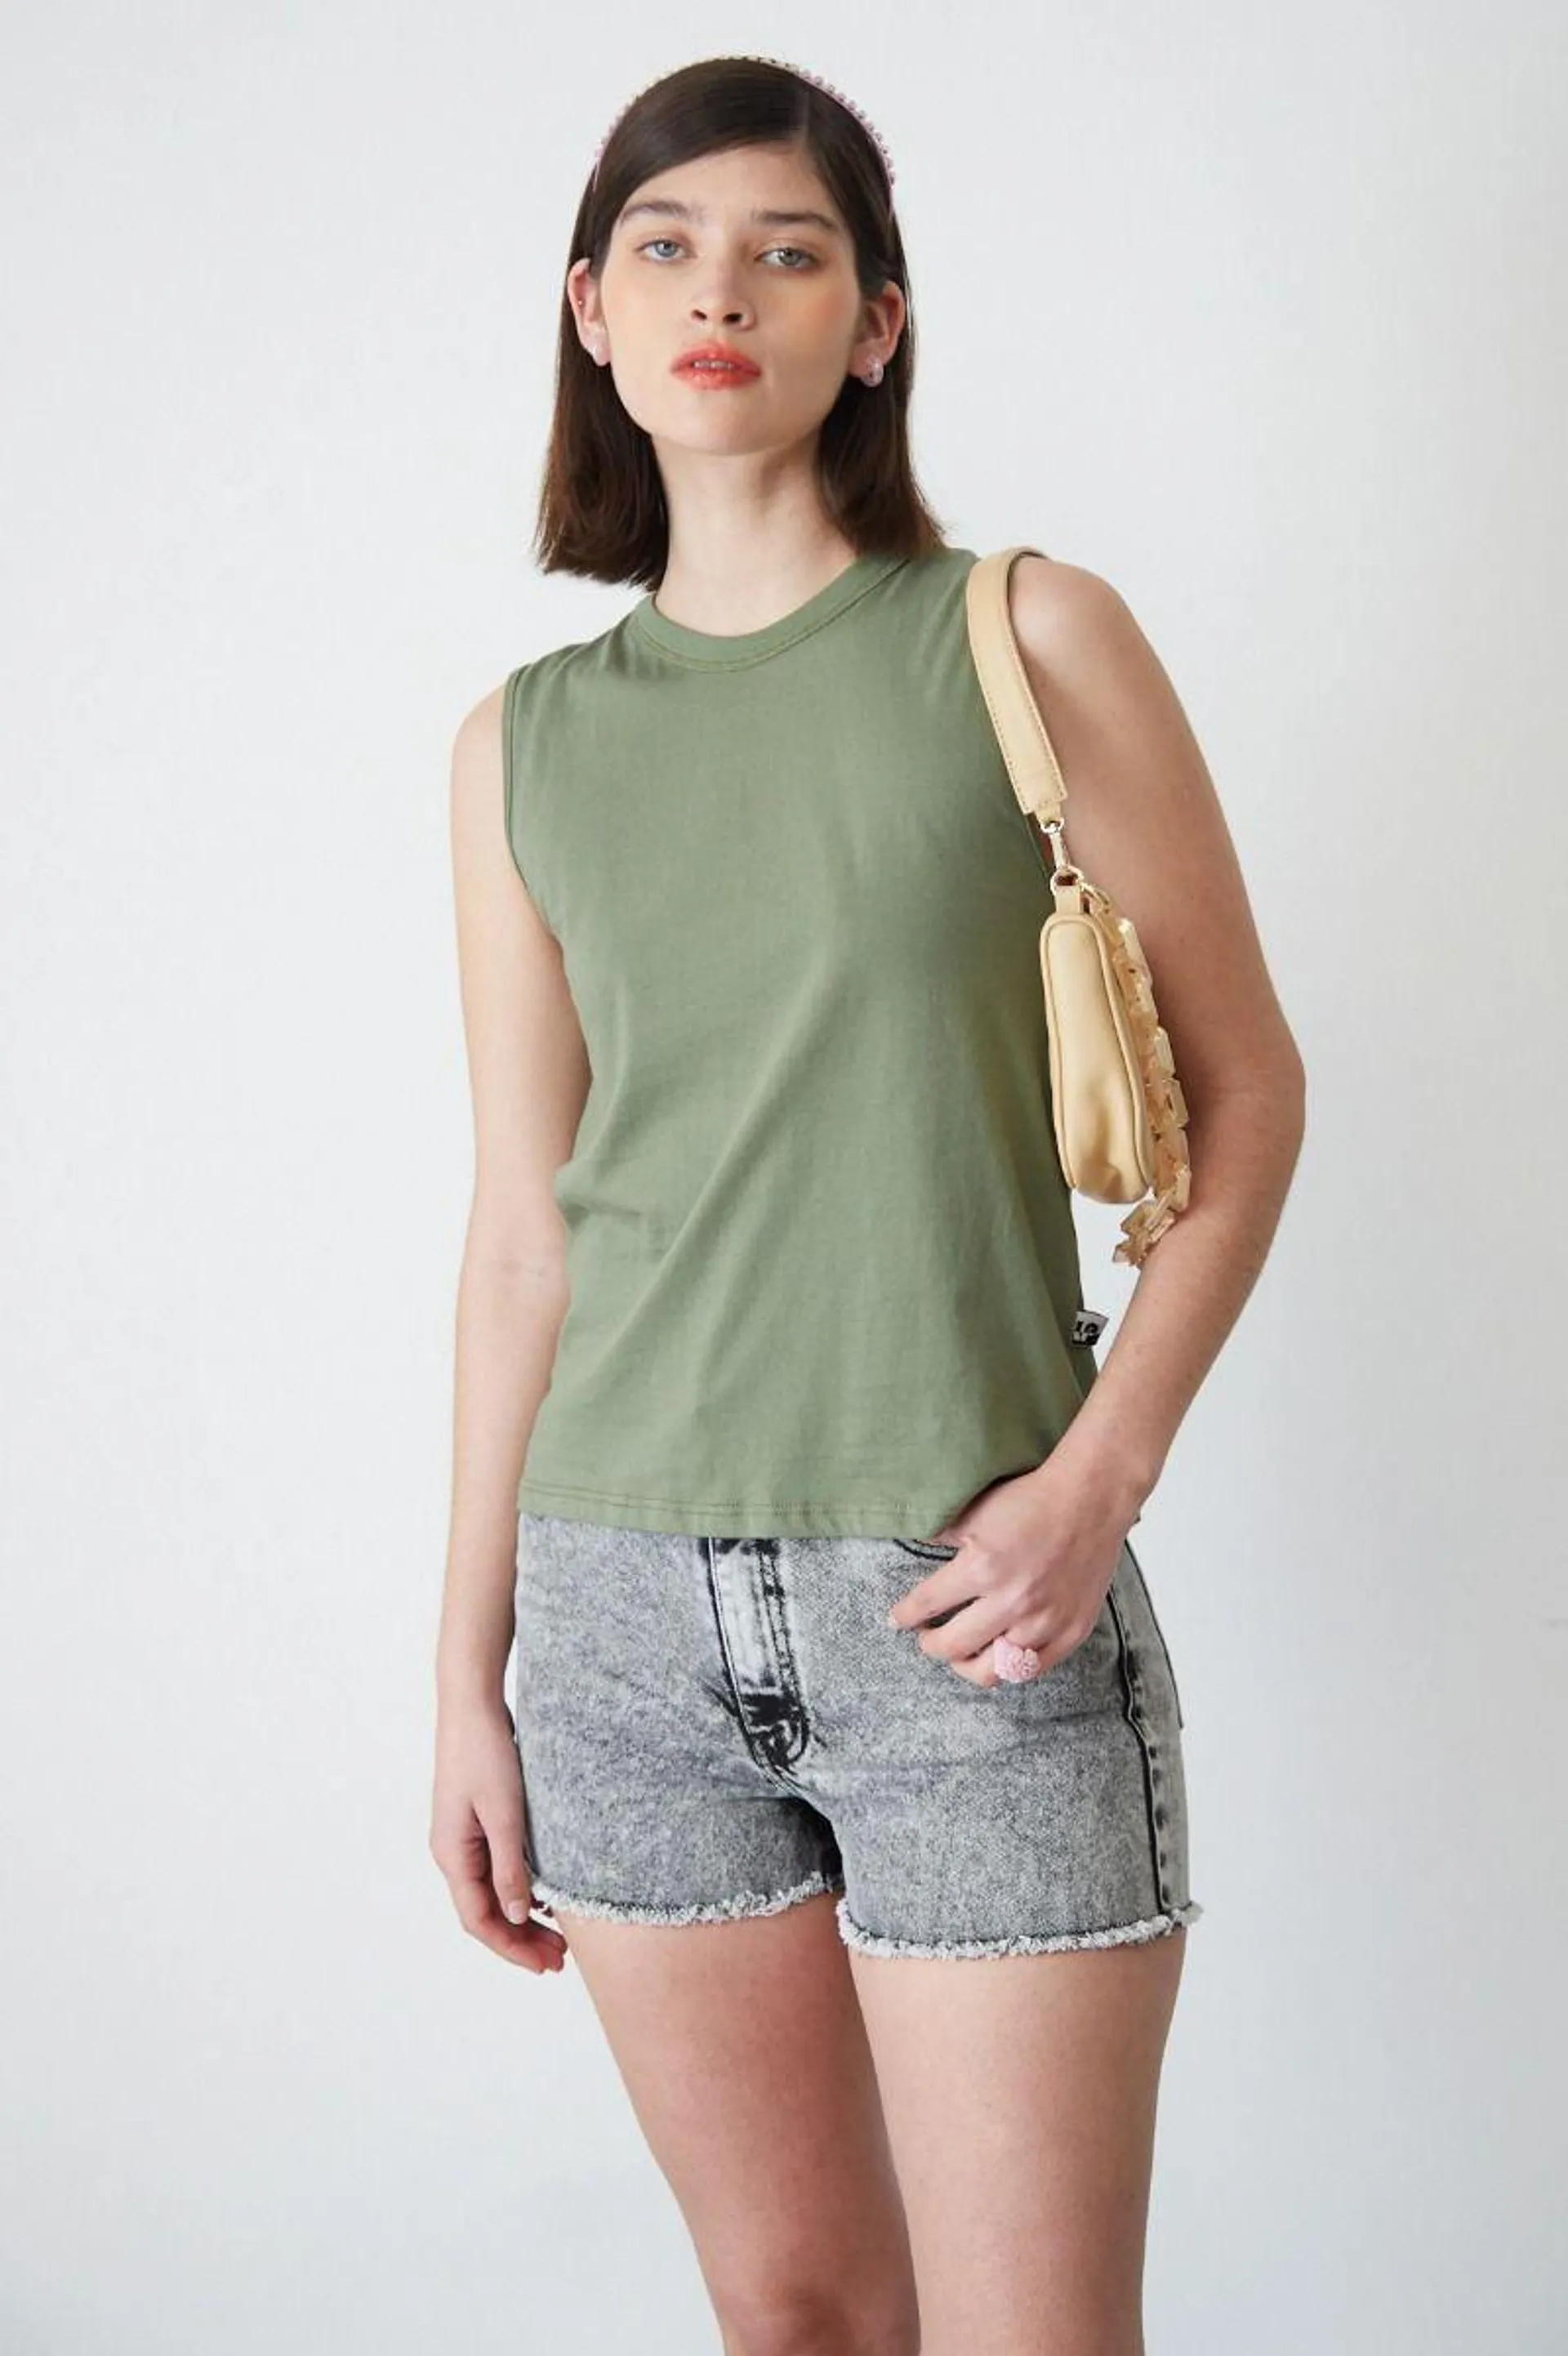 MUSCULOSA ANDES HUNT